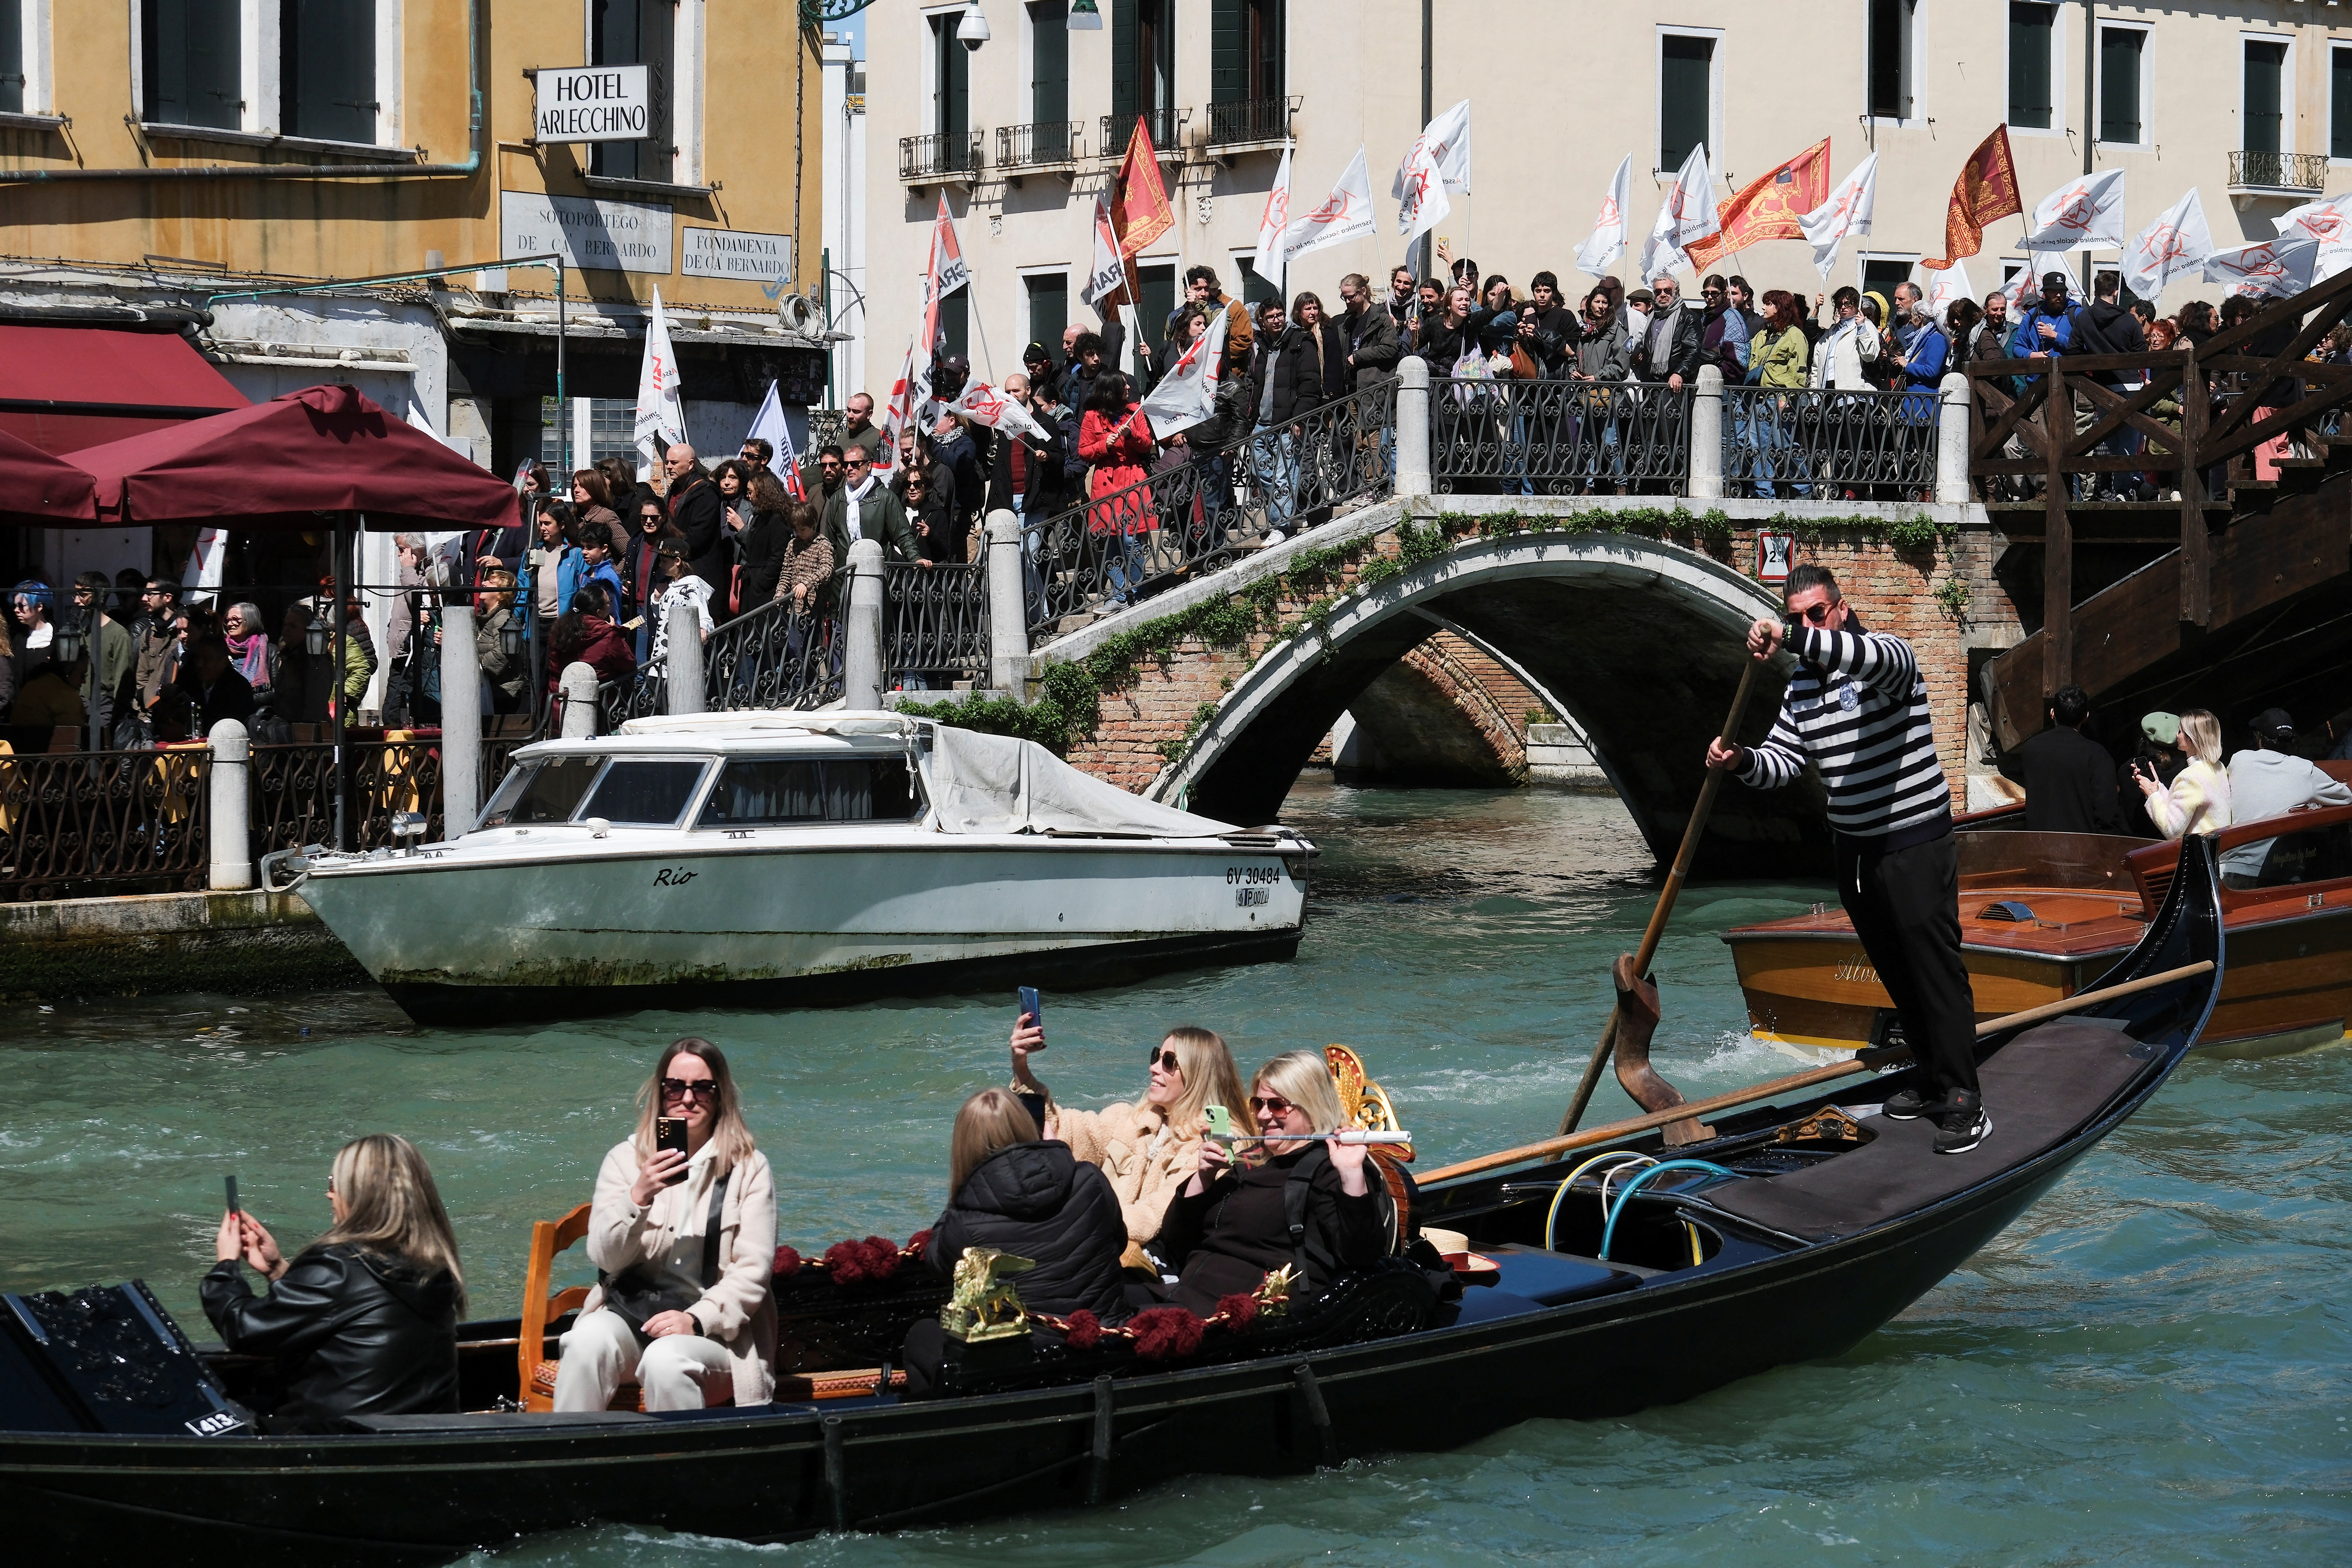 Protest against the introduction of the registration and tourist fee to visit the city of Venice